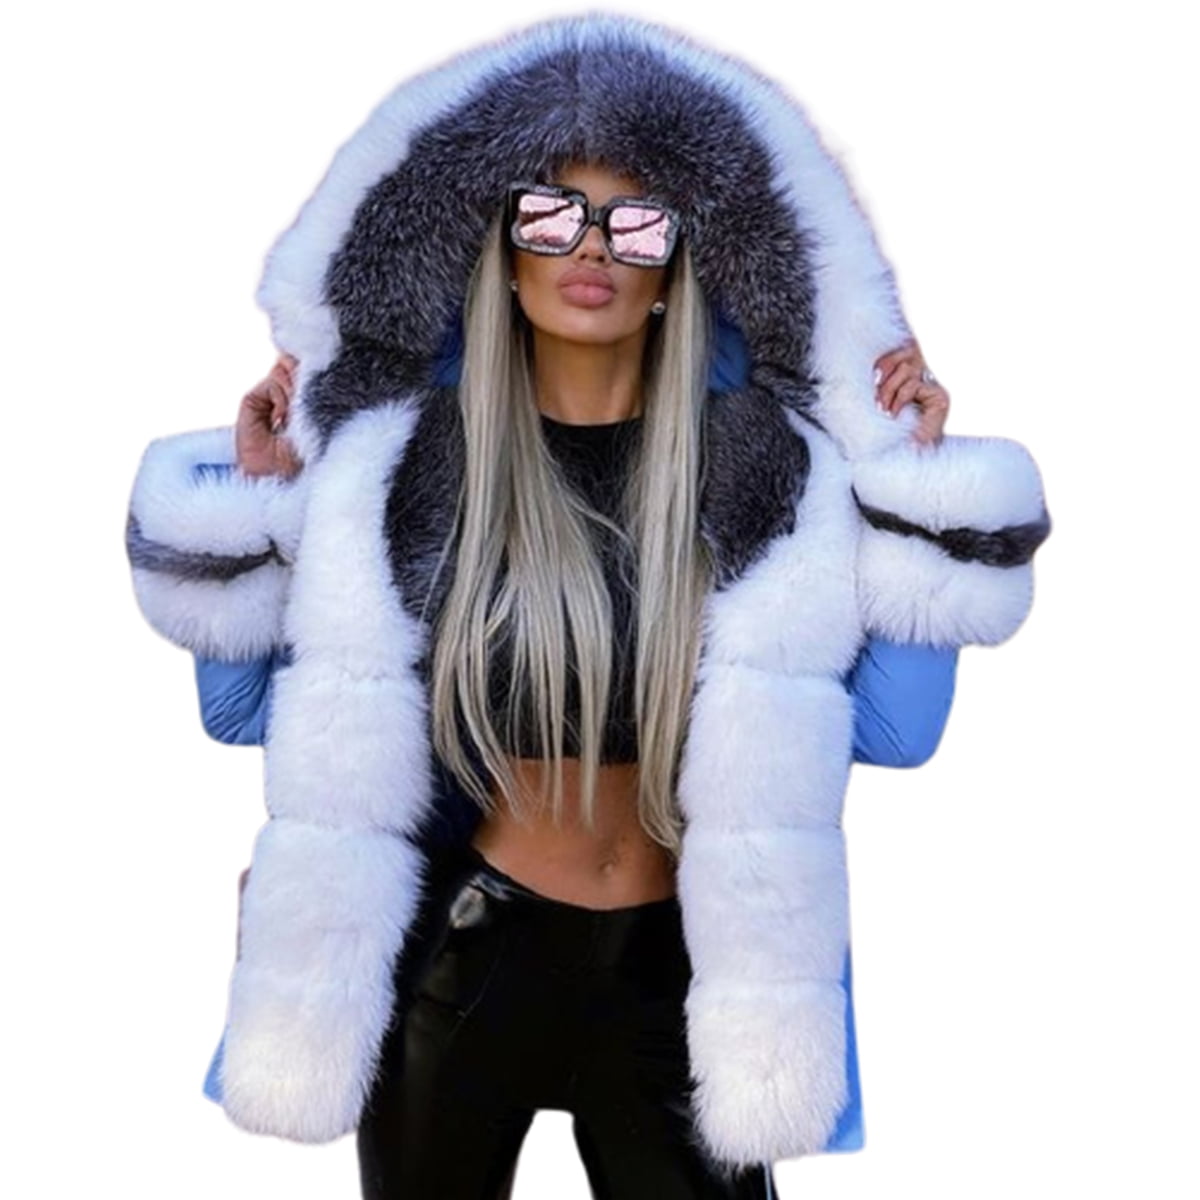 L White S,Manufacturer BLady Womens Classy 2 Color Faux Mink & Silver Fox Fur Medium Hooded Coat